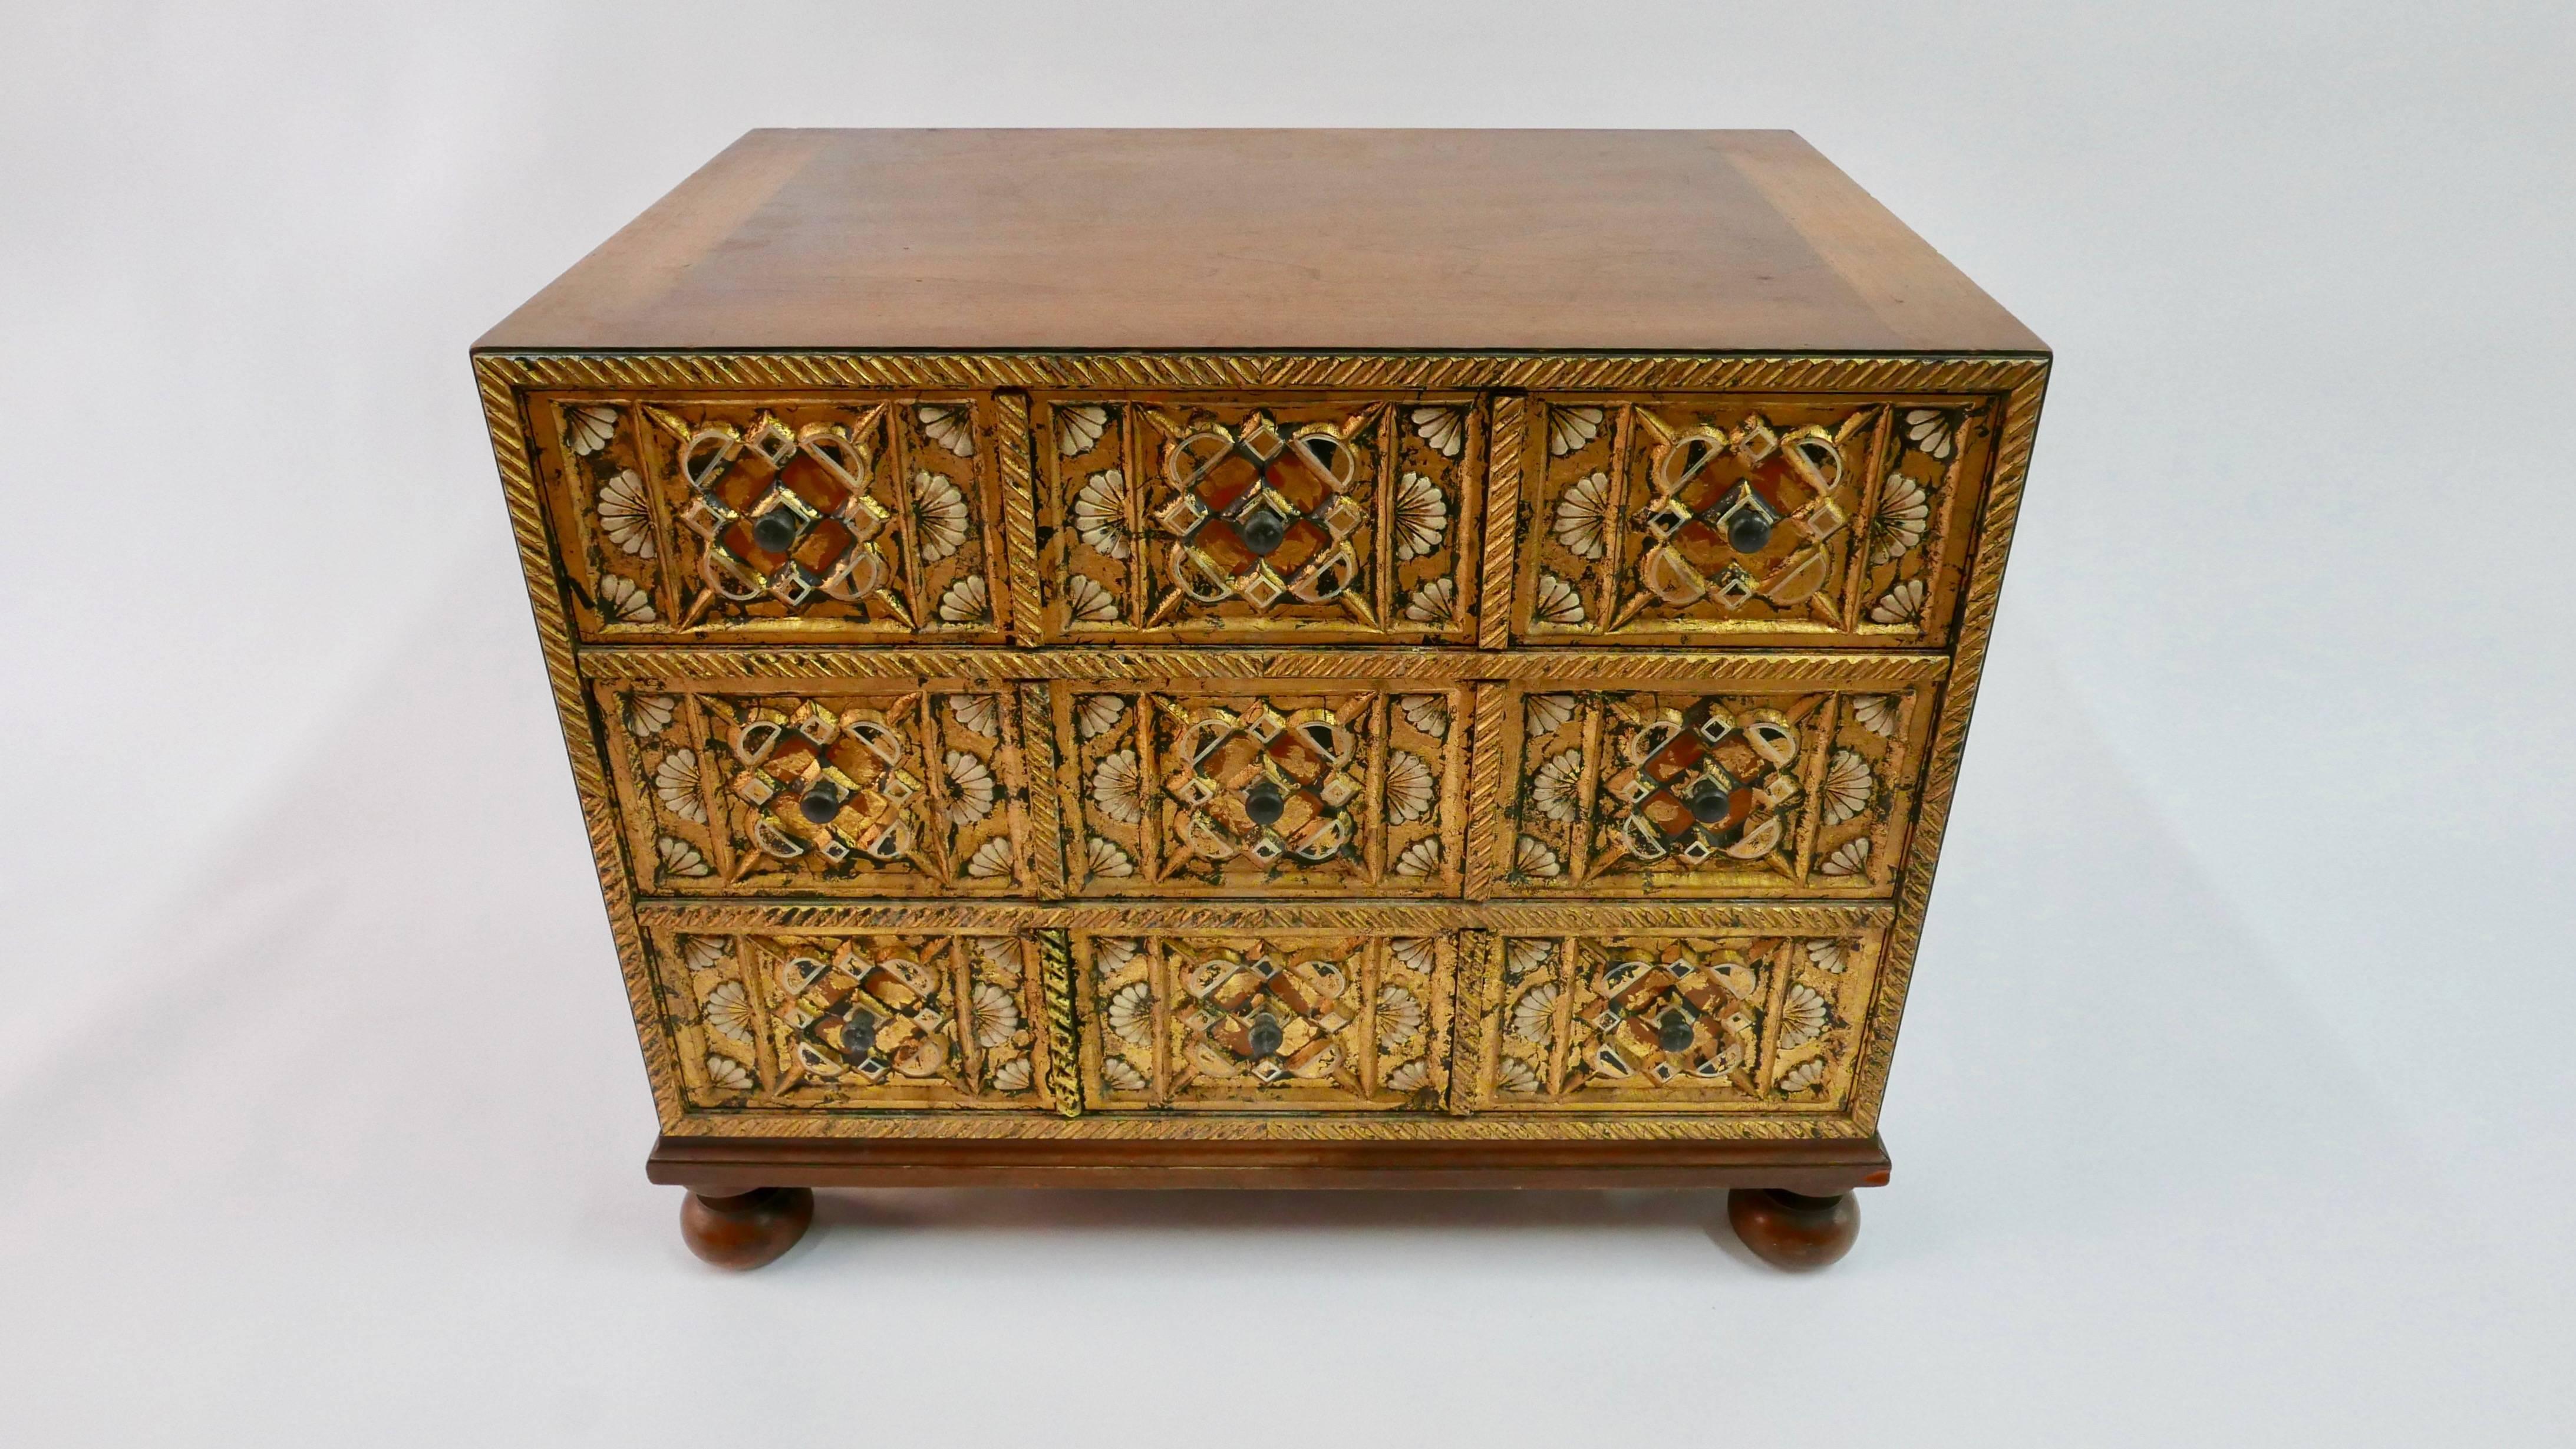 A small cabinet with three drawers. Hand-carved drawer fronts with gold-leafed accents.
Designed by William A. Berkey and manufactured by Widdicomb Furniture.
  